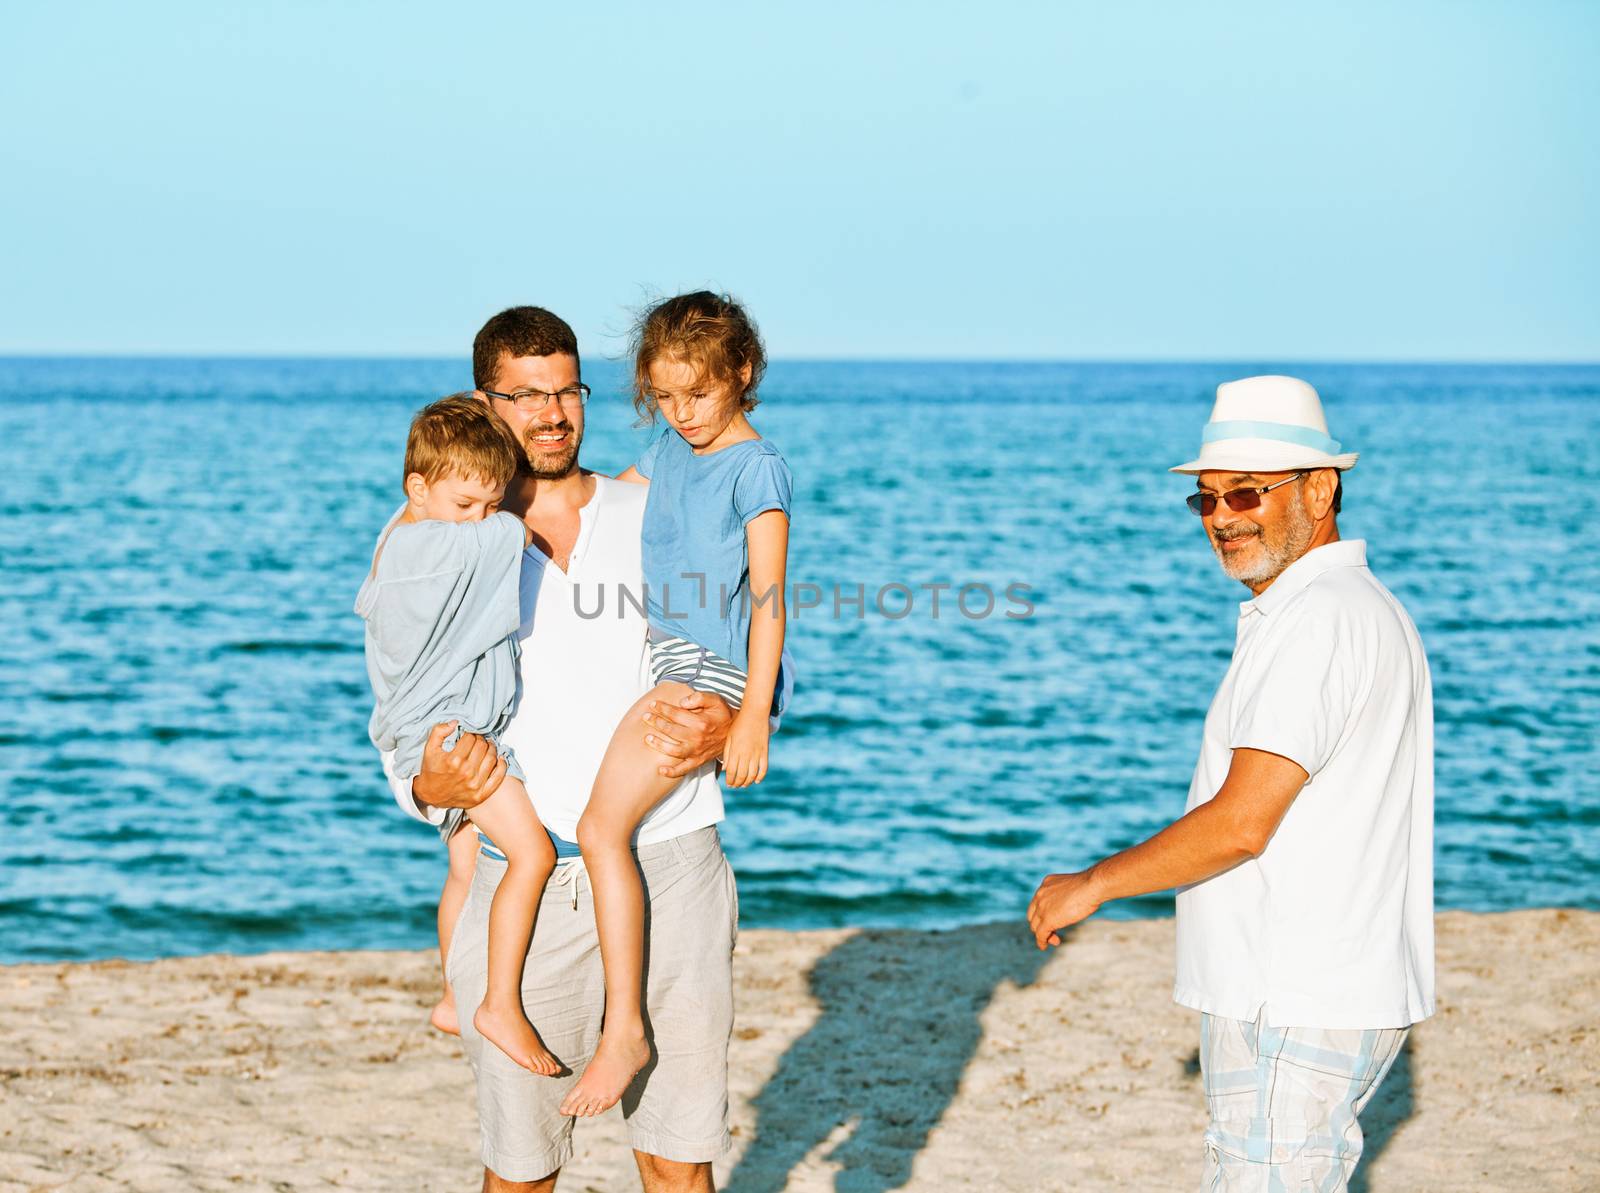 A father is lifting brother and sister kids on the seashore while grandfather is approaching with a smile.